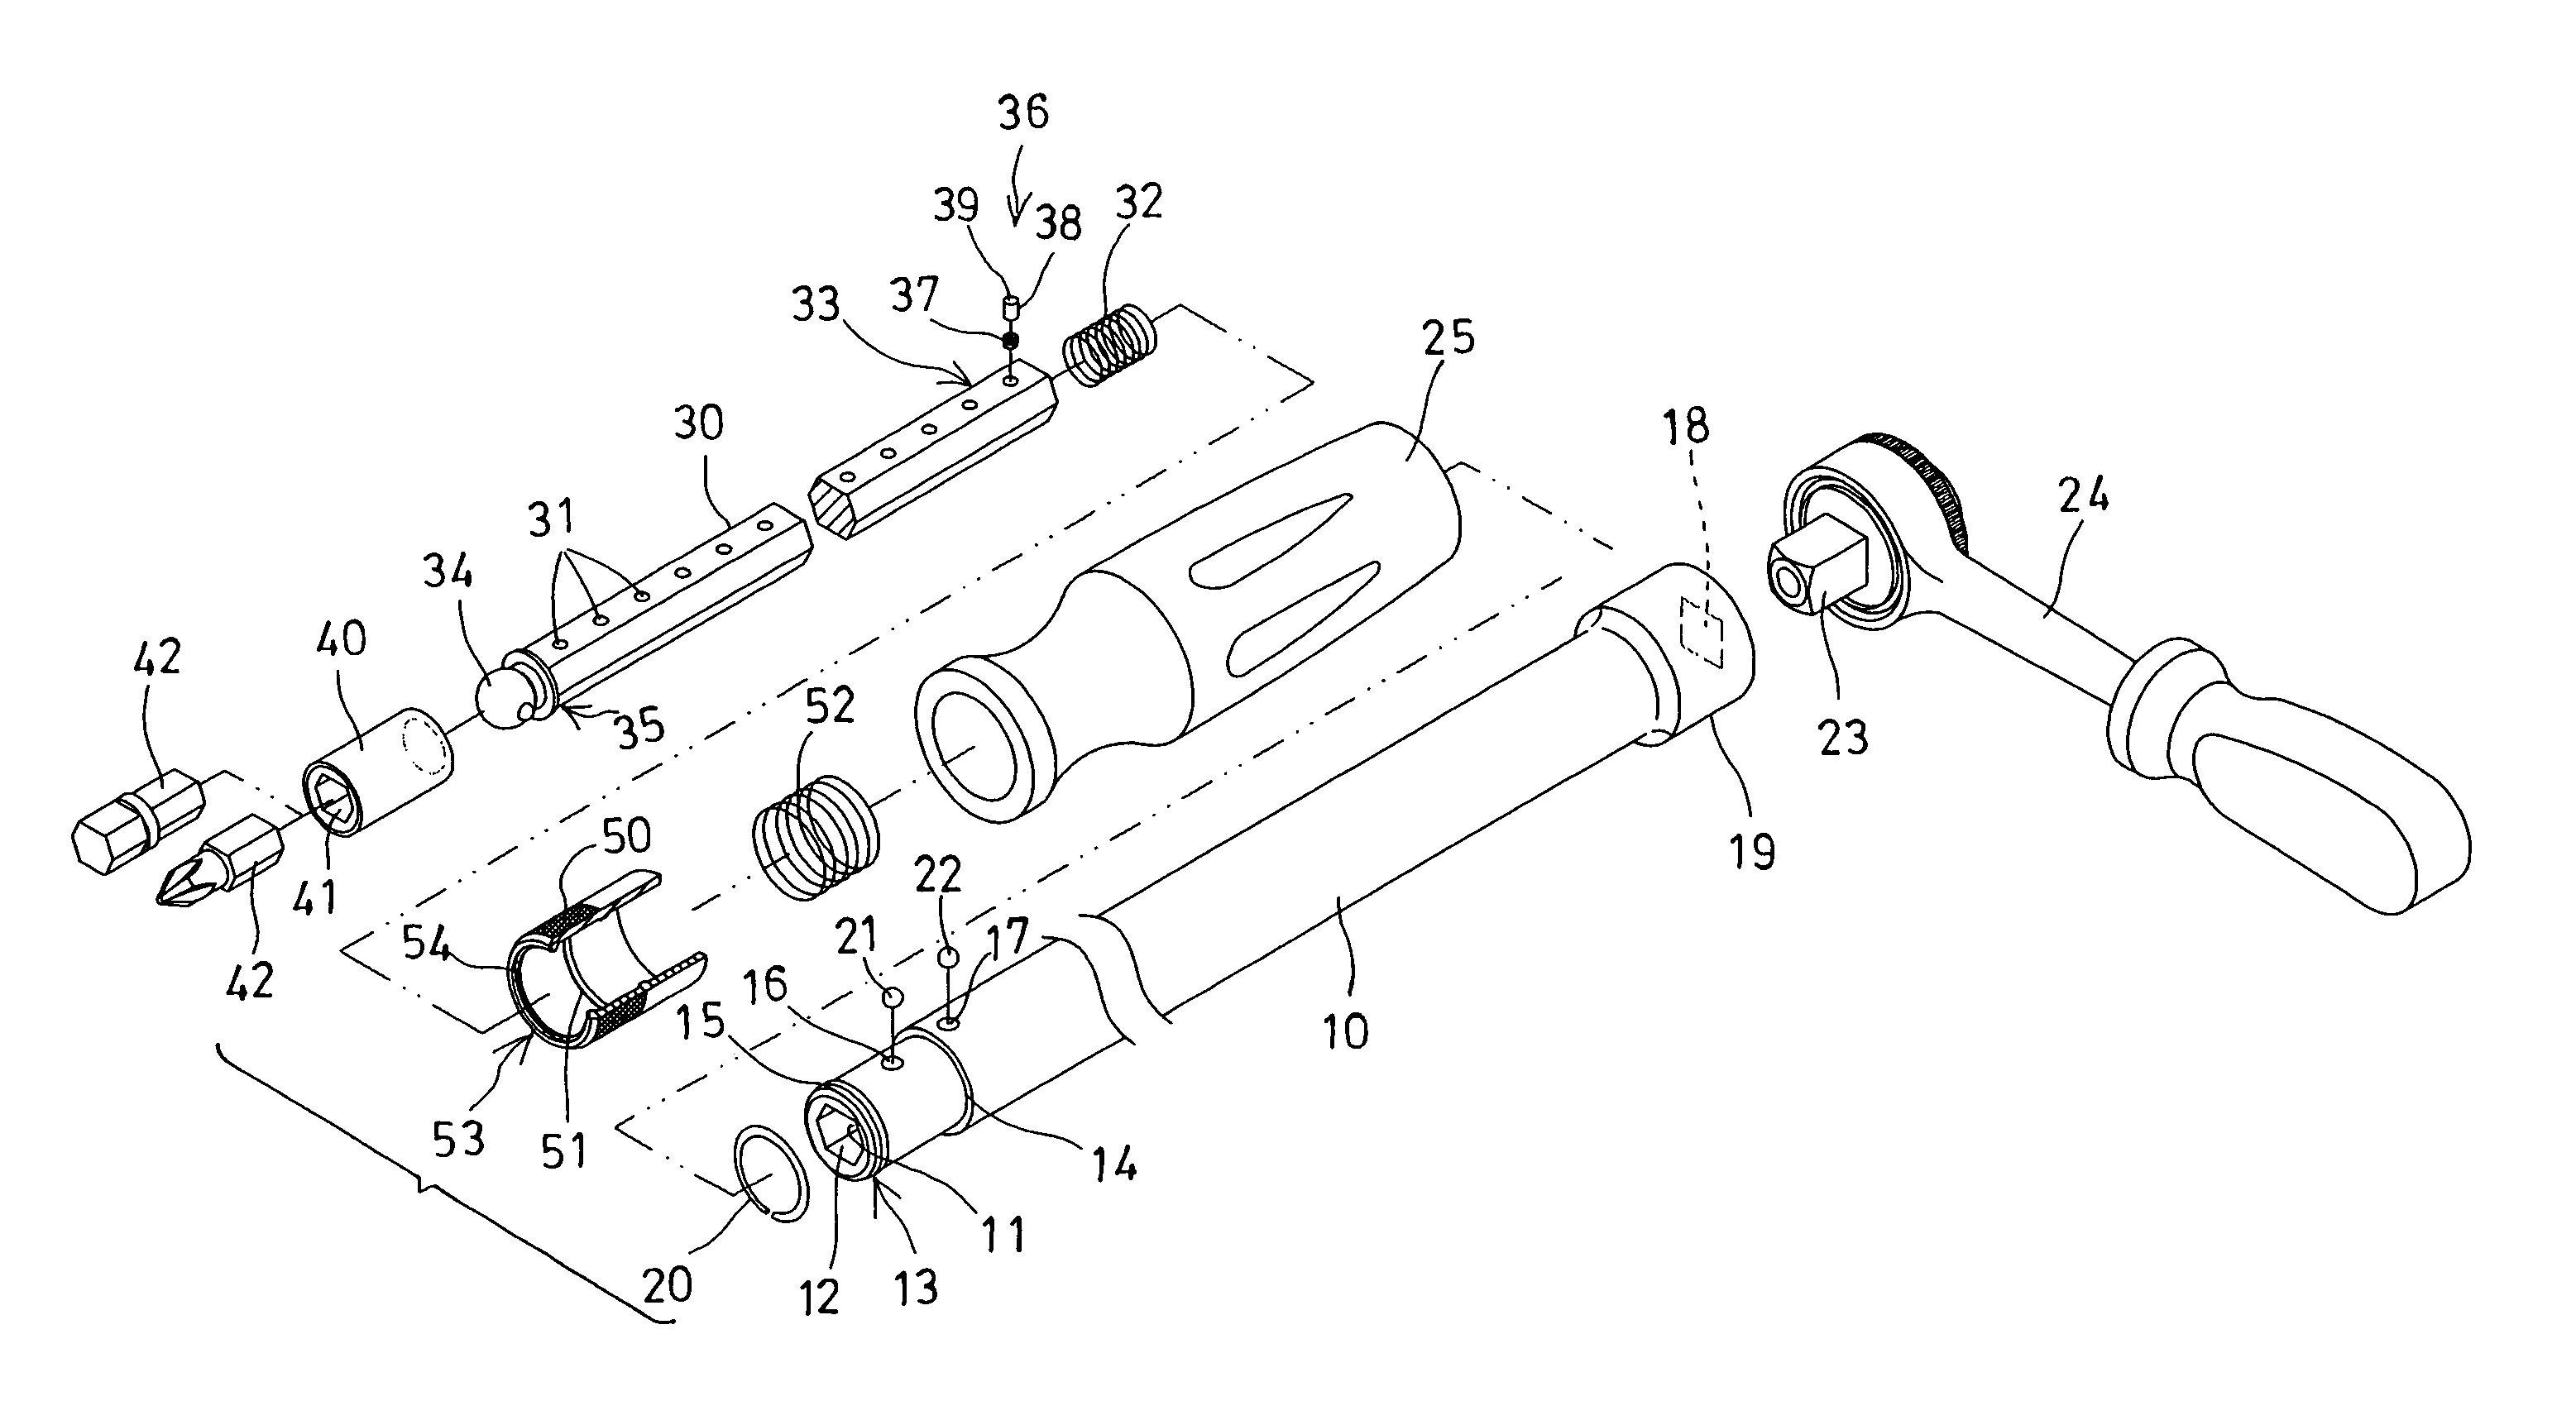 Extension tool having anchoring device